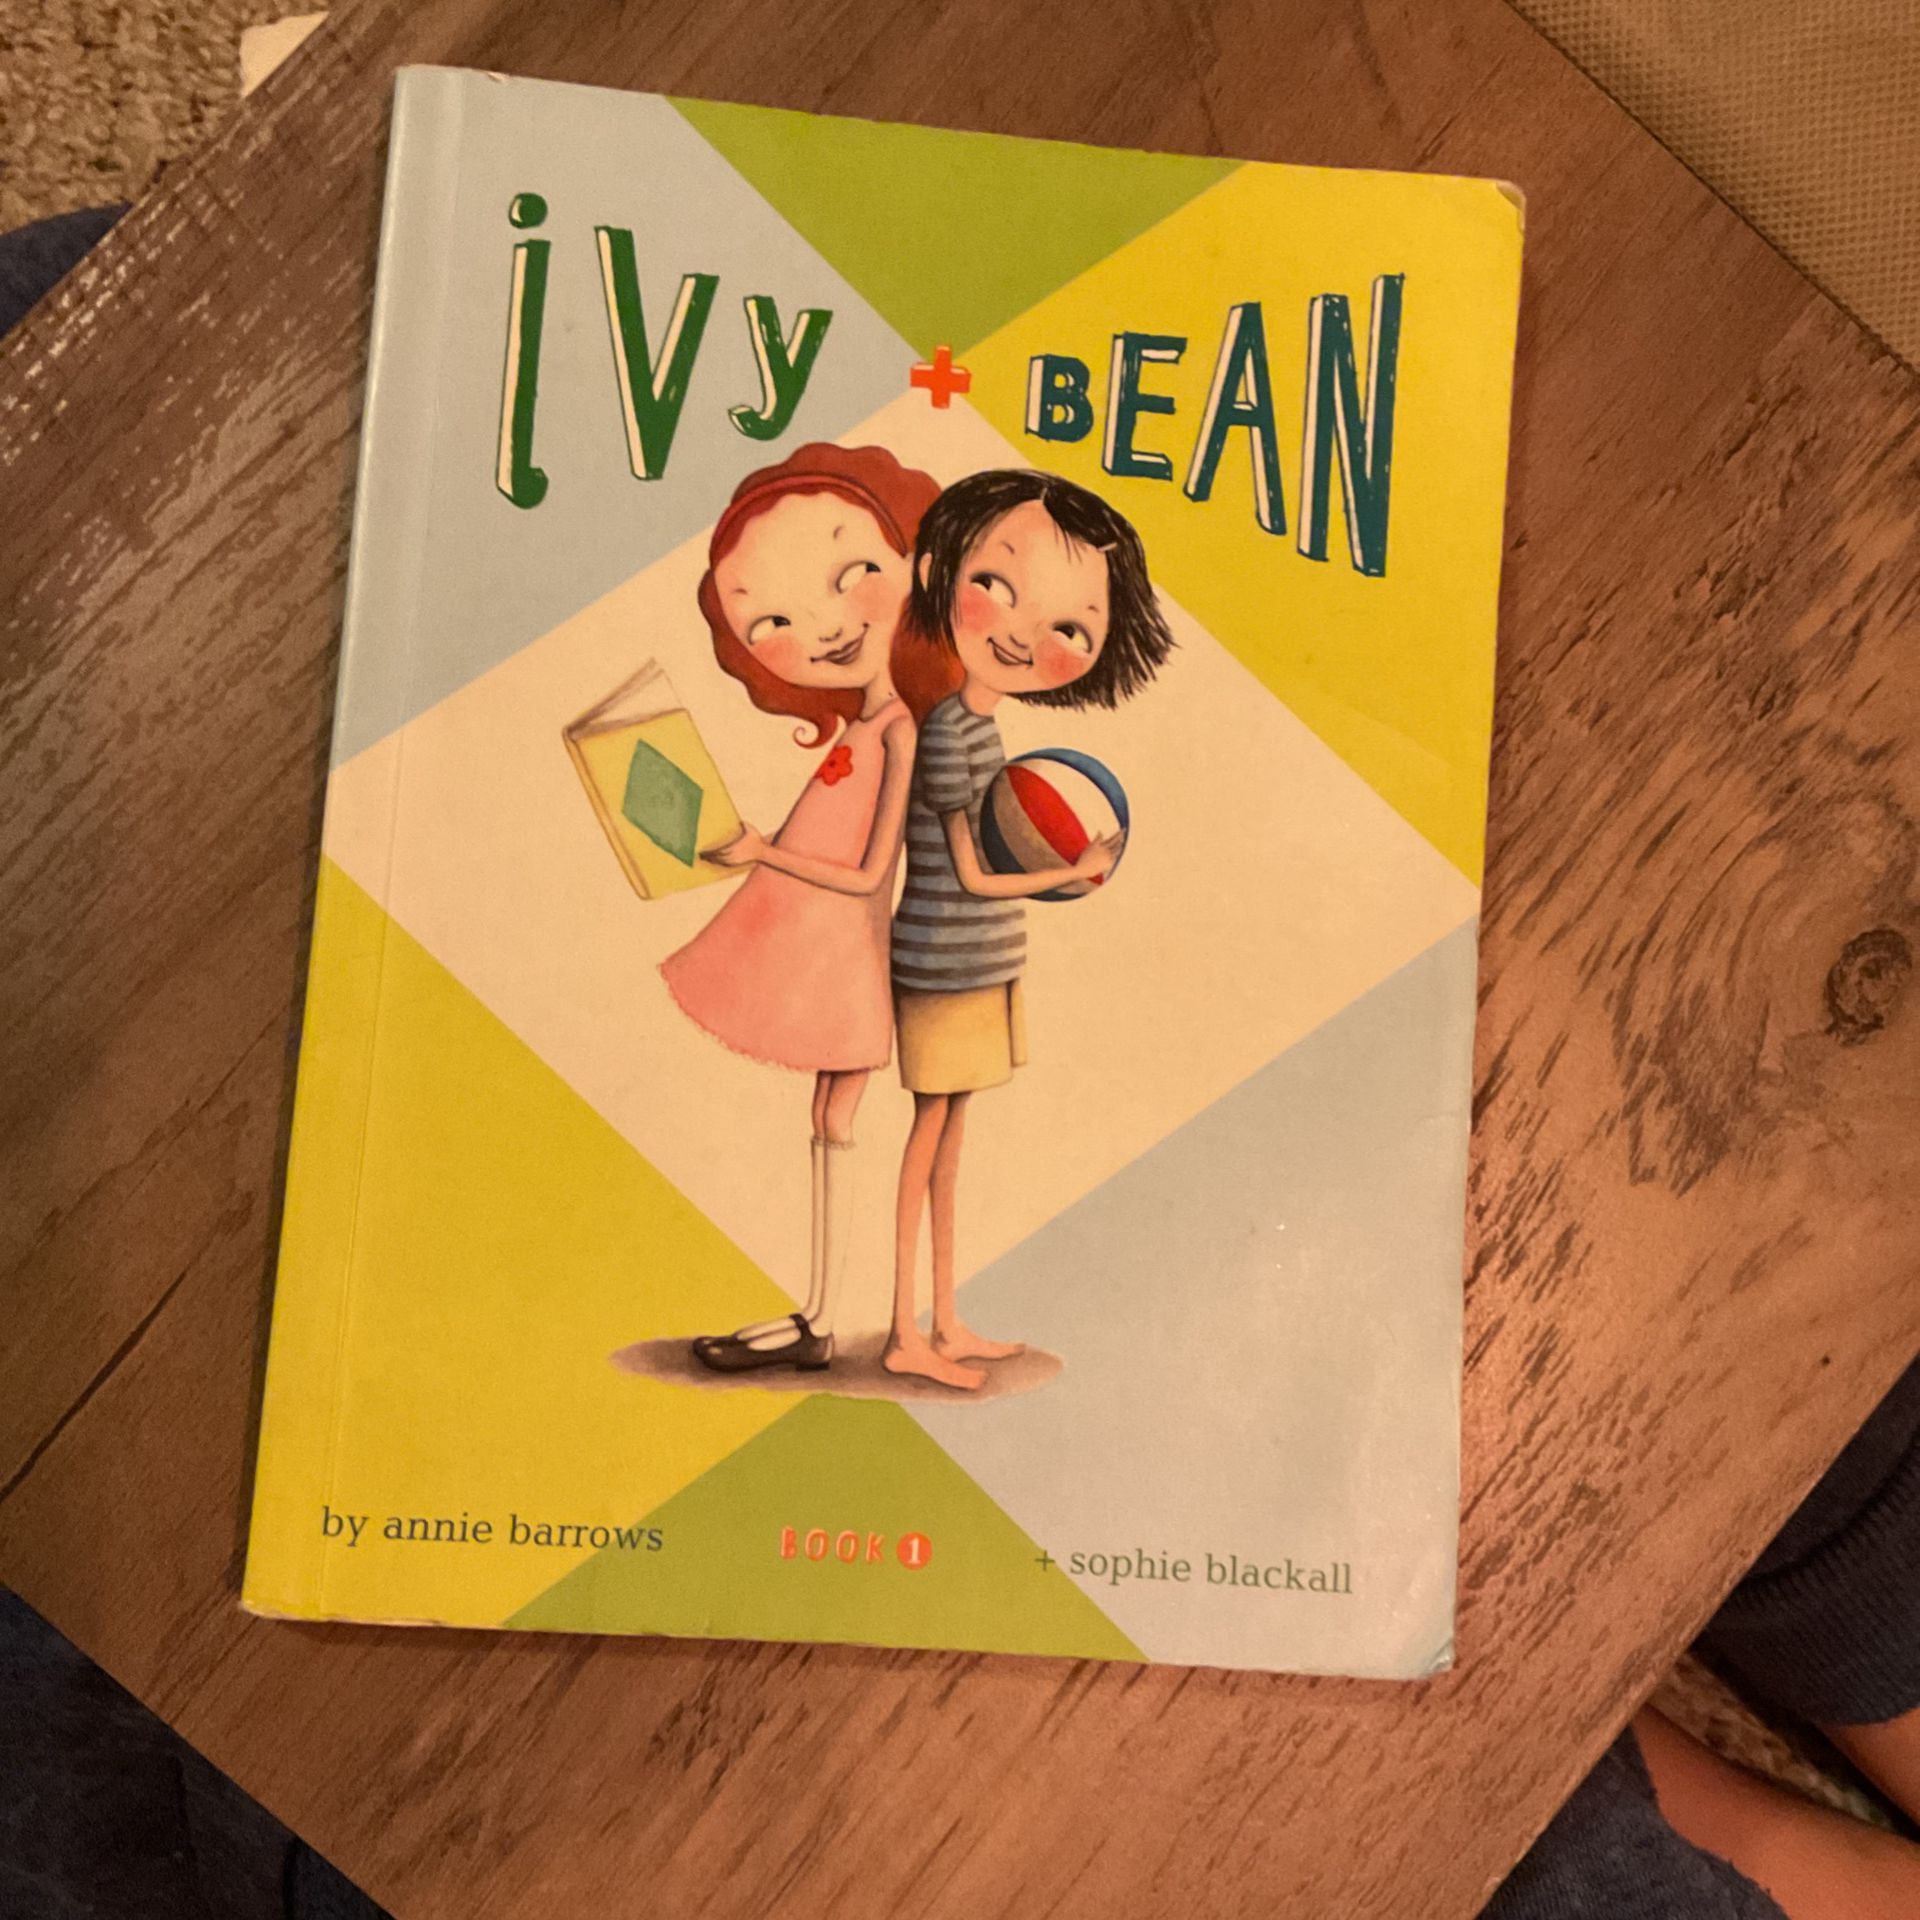 Ivy and bean